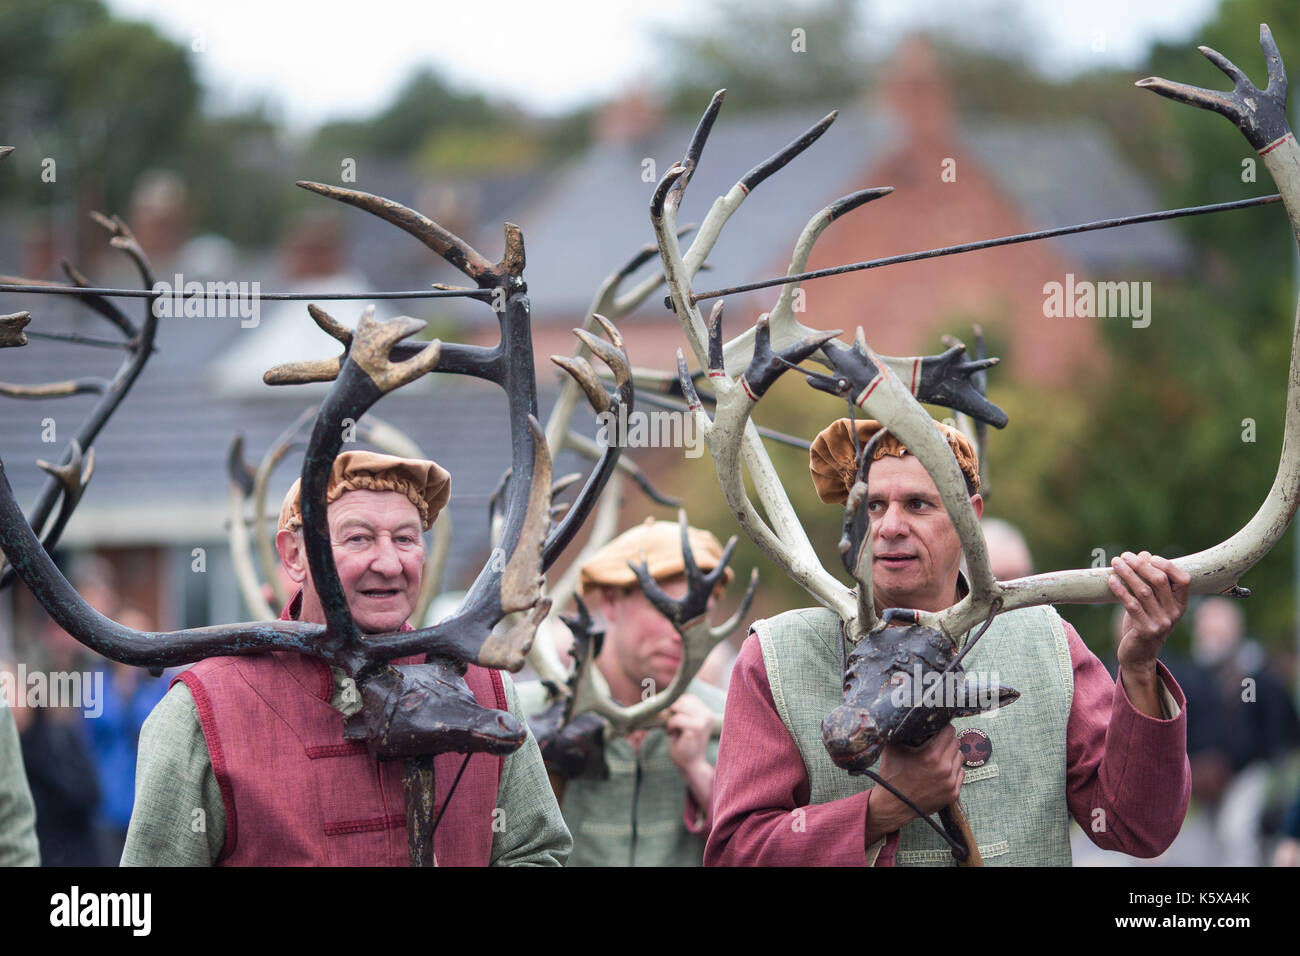 Villagers take part in the rural custom of The Horn Dance, performed every year on Wakes Monday, the first Monday after September 4th 'to ensure successful hunting', at Abbots Bromley, in Staffordshire. Stock Photo